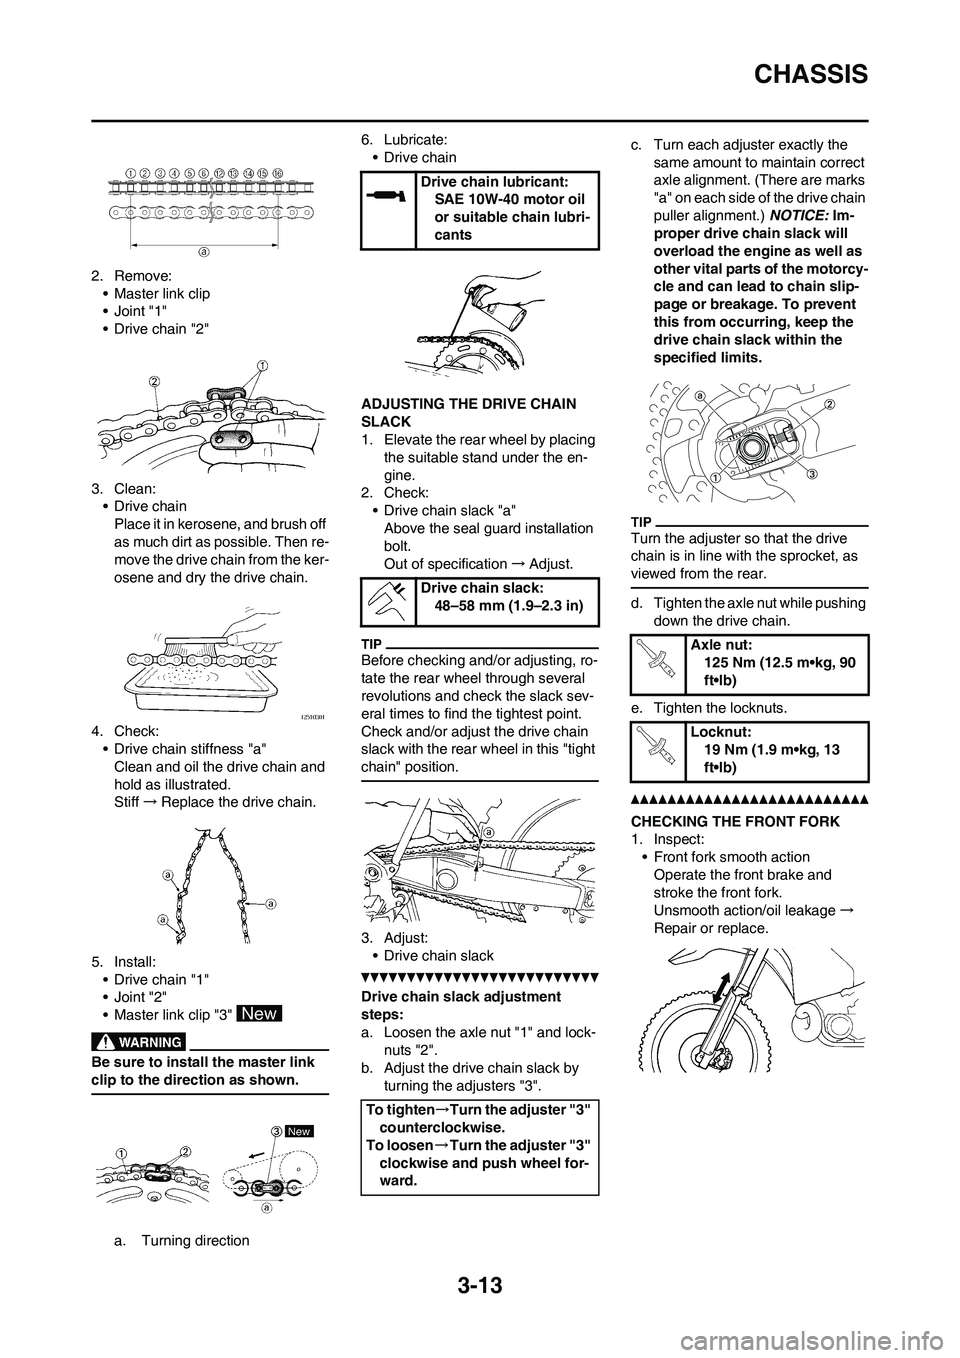 YAMAHA YZ125LC 2010  Owners Manual 3-13
CHASSIS
2. Remove:
• Master link clip
•Joint "1"
• Drive chain "2"
3. Clean:
• Drive chain
Place it in kerosene, and brush off 
as much dirt as possible. Then re-
move the drive chain fro